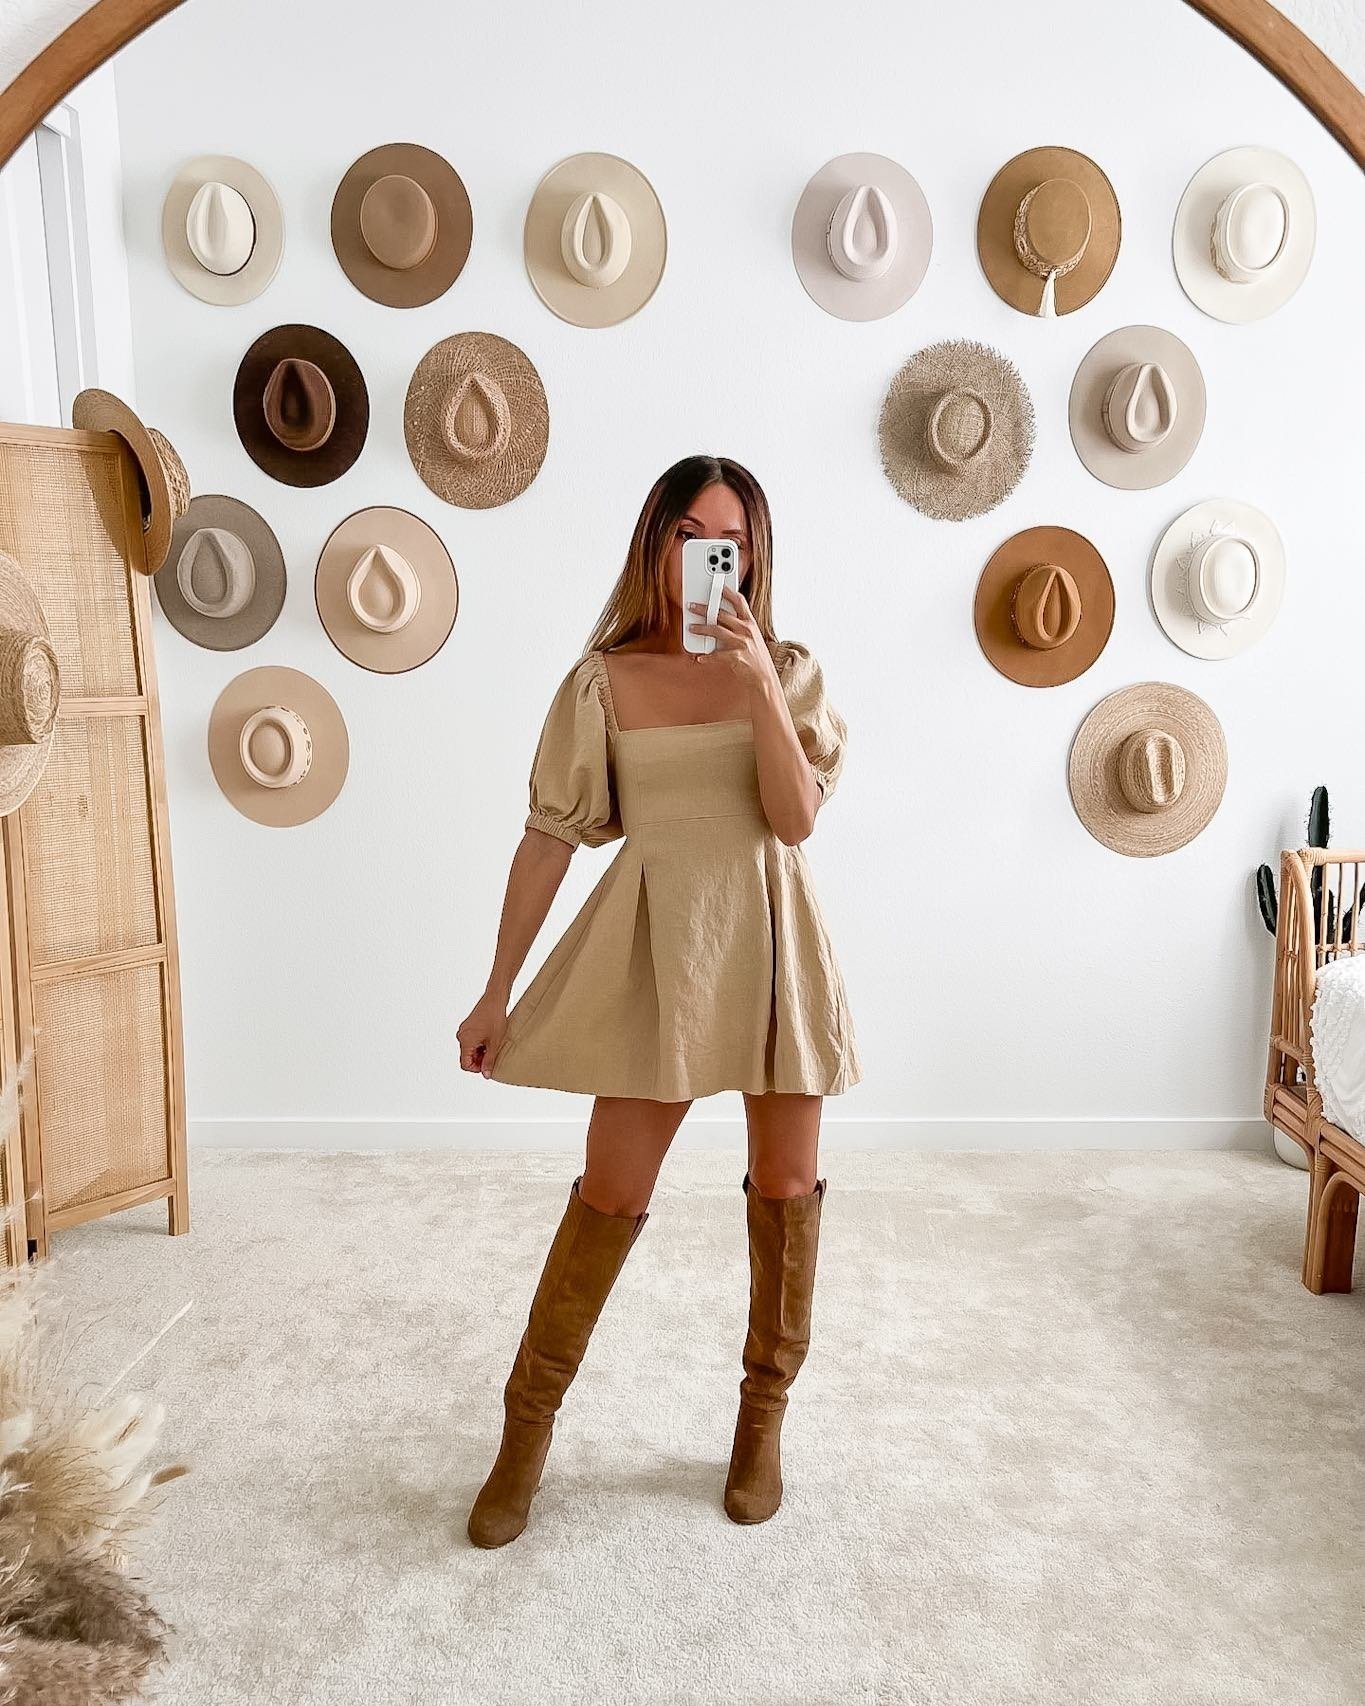 Most Adorable Elegant Fall Outfits Ideas That You'll Want to Copy in 2022